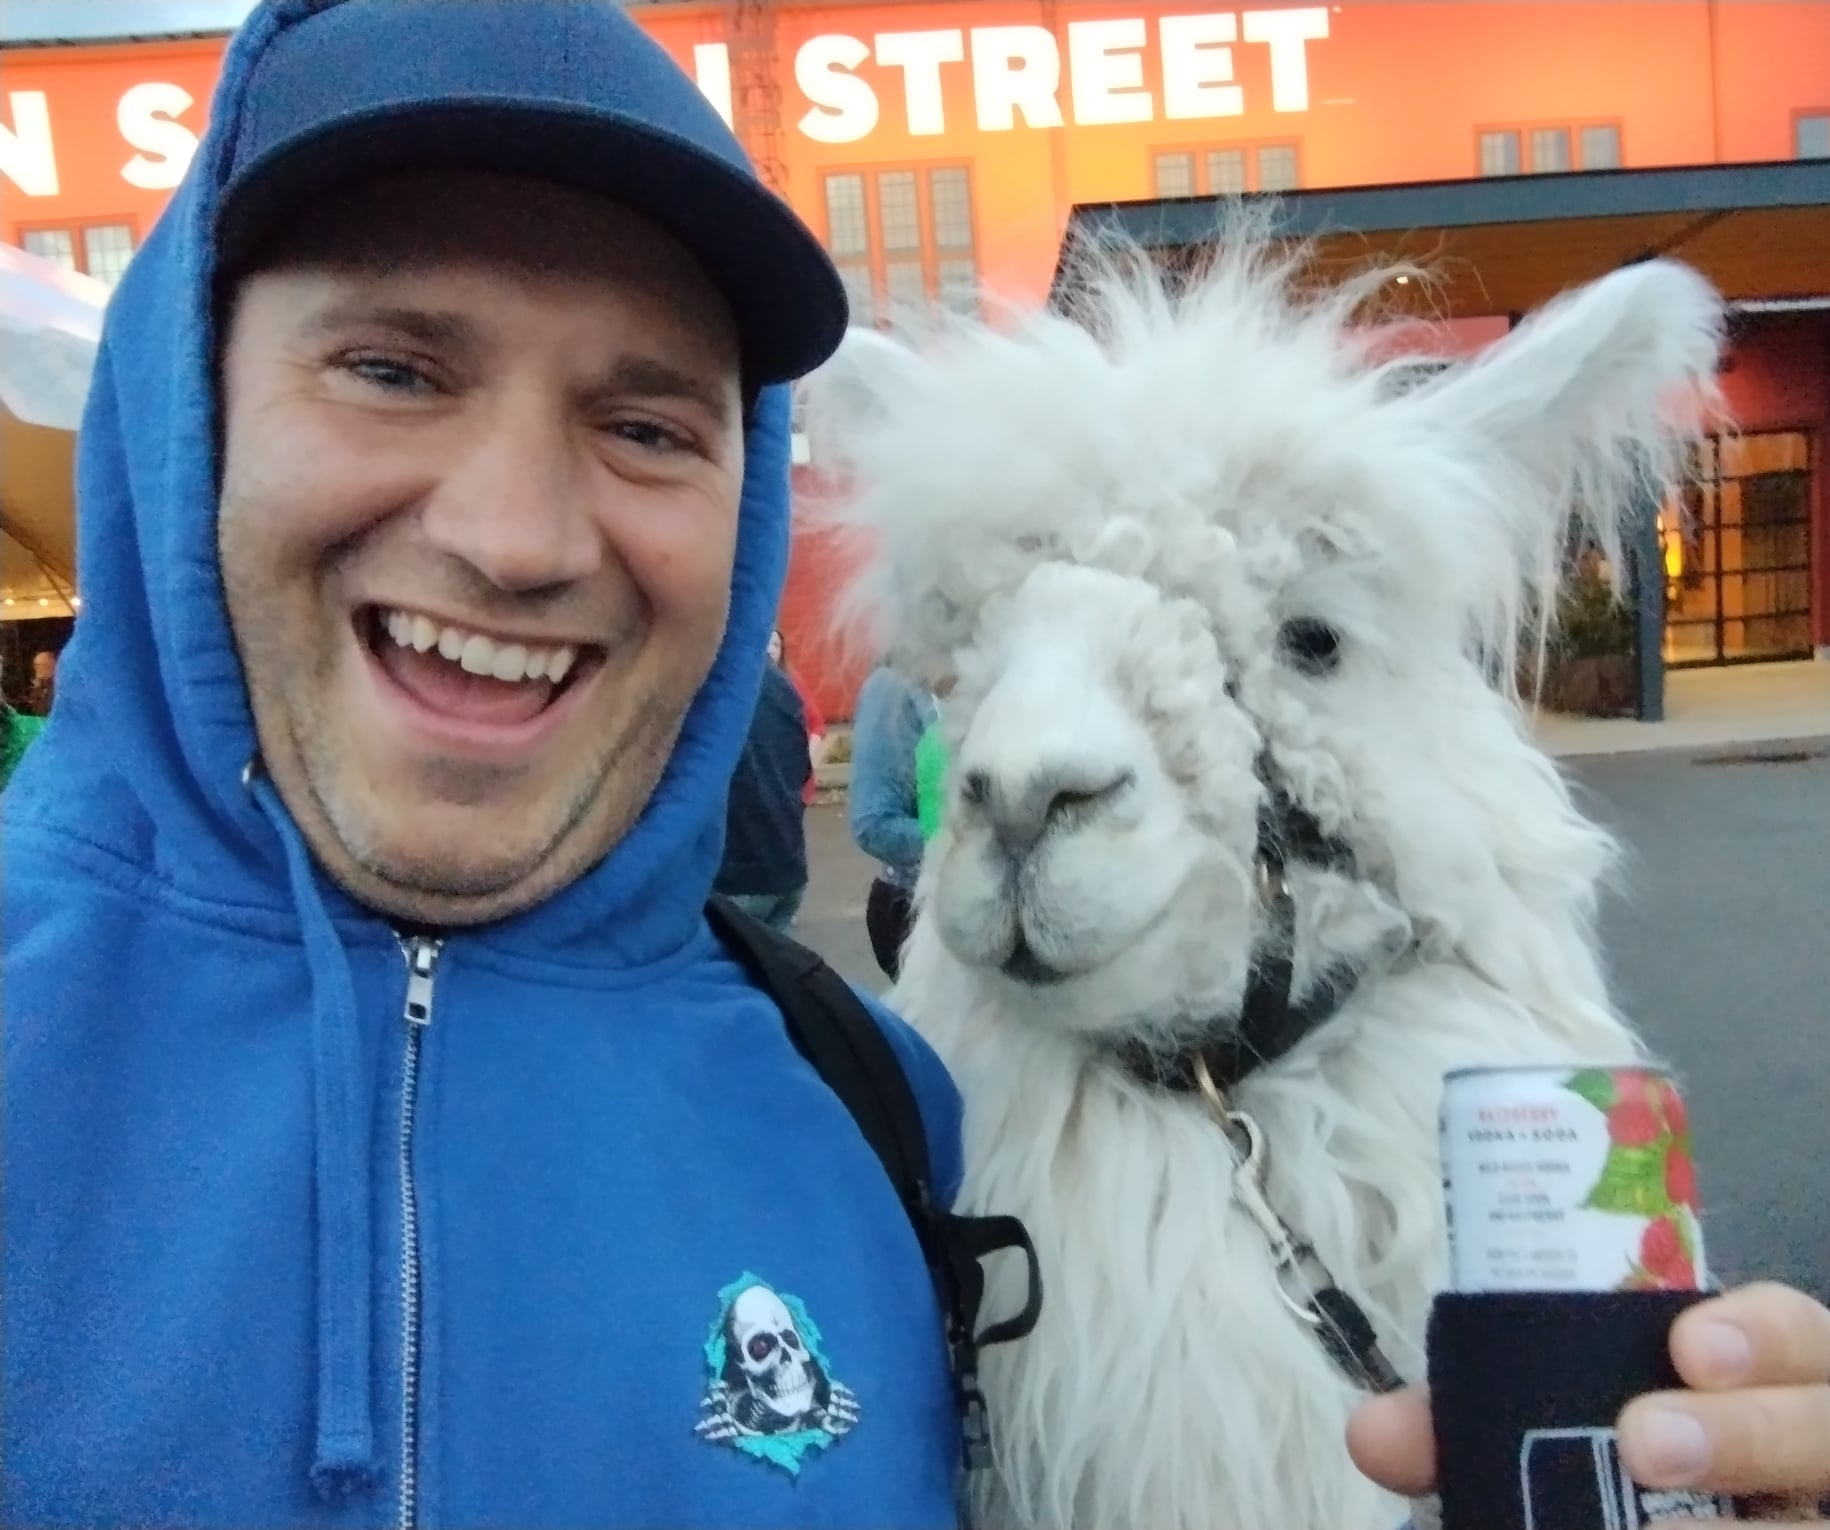 Jesse Nicola posing with an Alpaca, or is it a camel? We will never know.